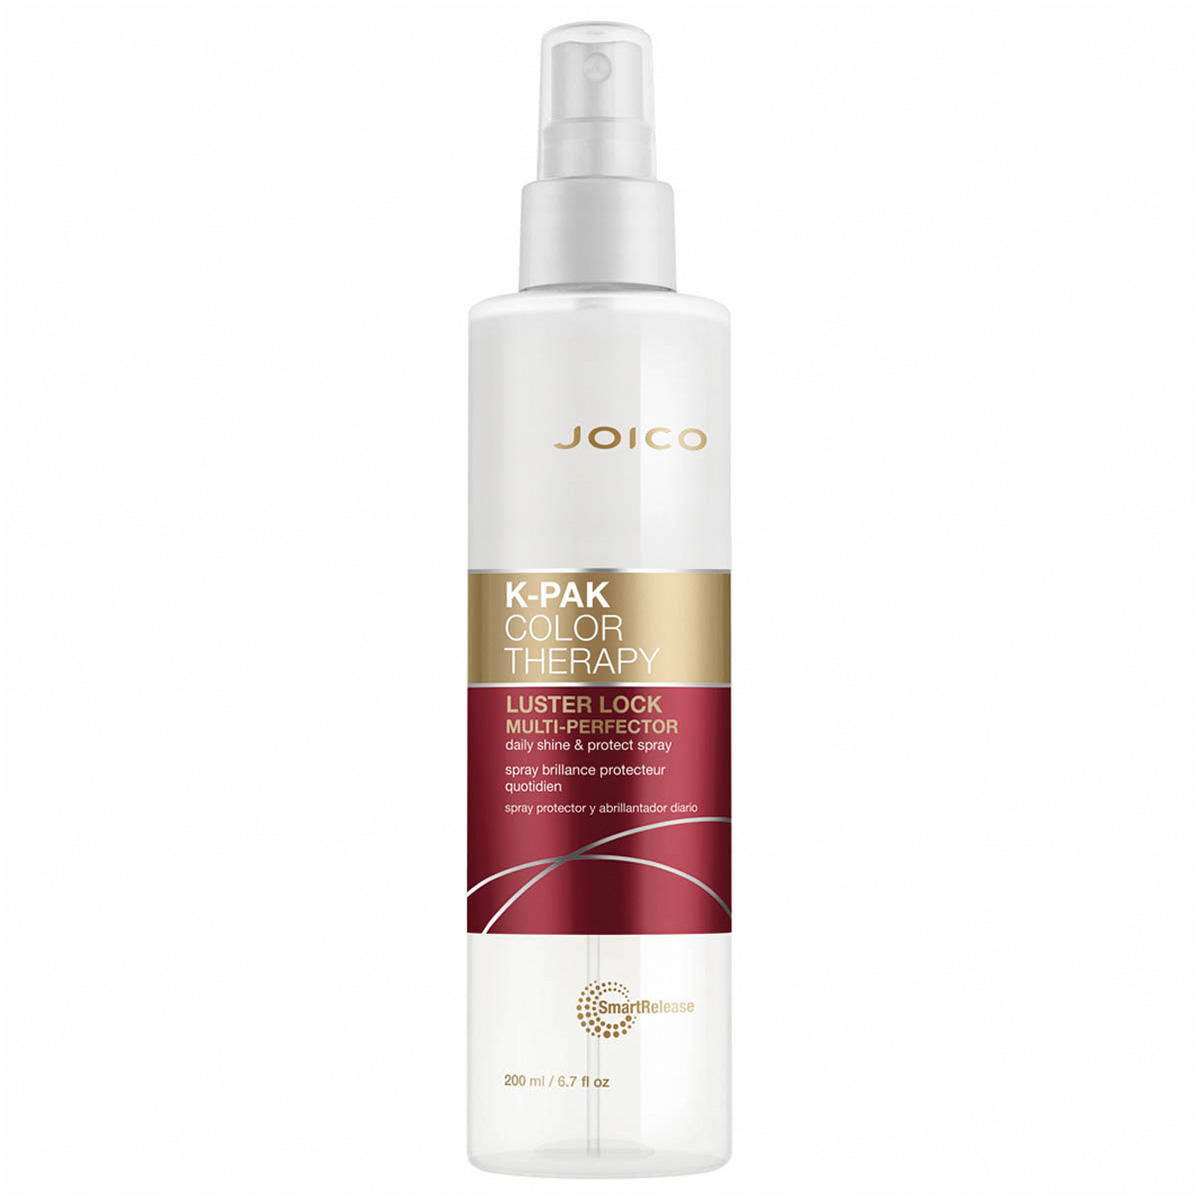 JOICO K-PAK Color Therapy Luster Lock Multi-Perfector Daily Shine & Protect Spray  - 1